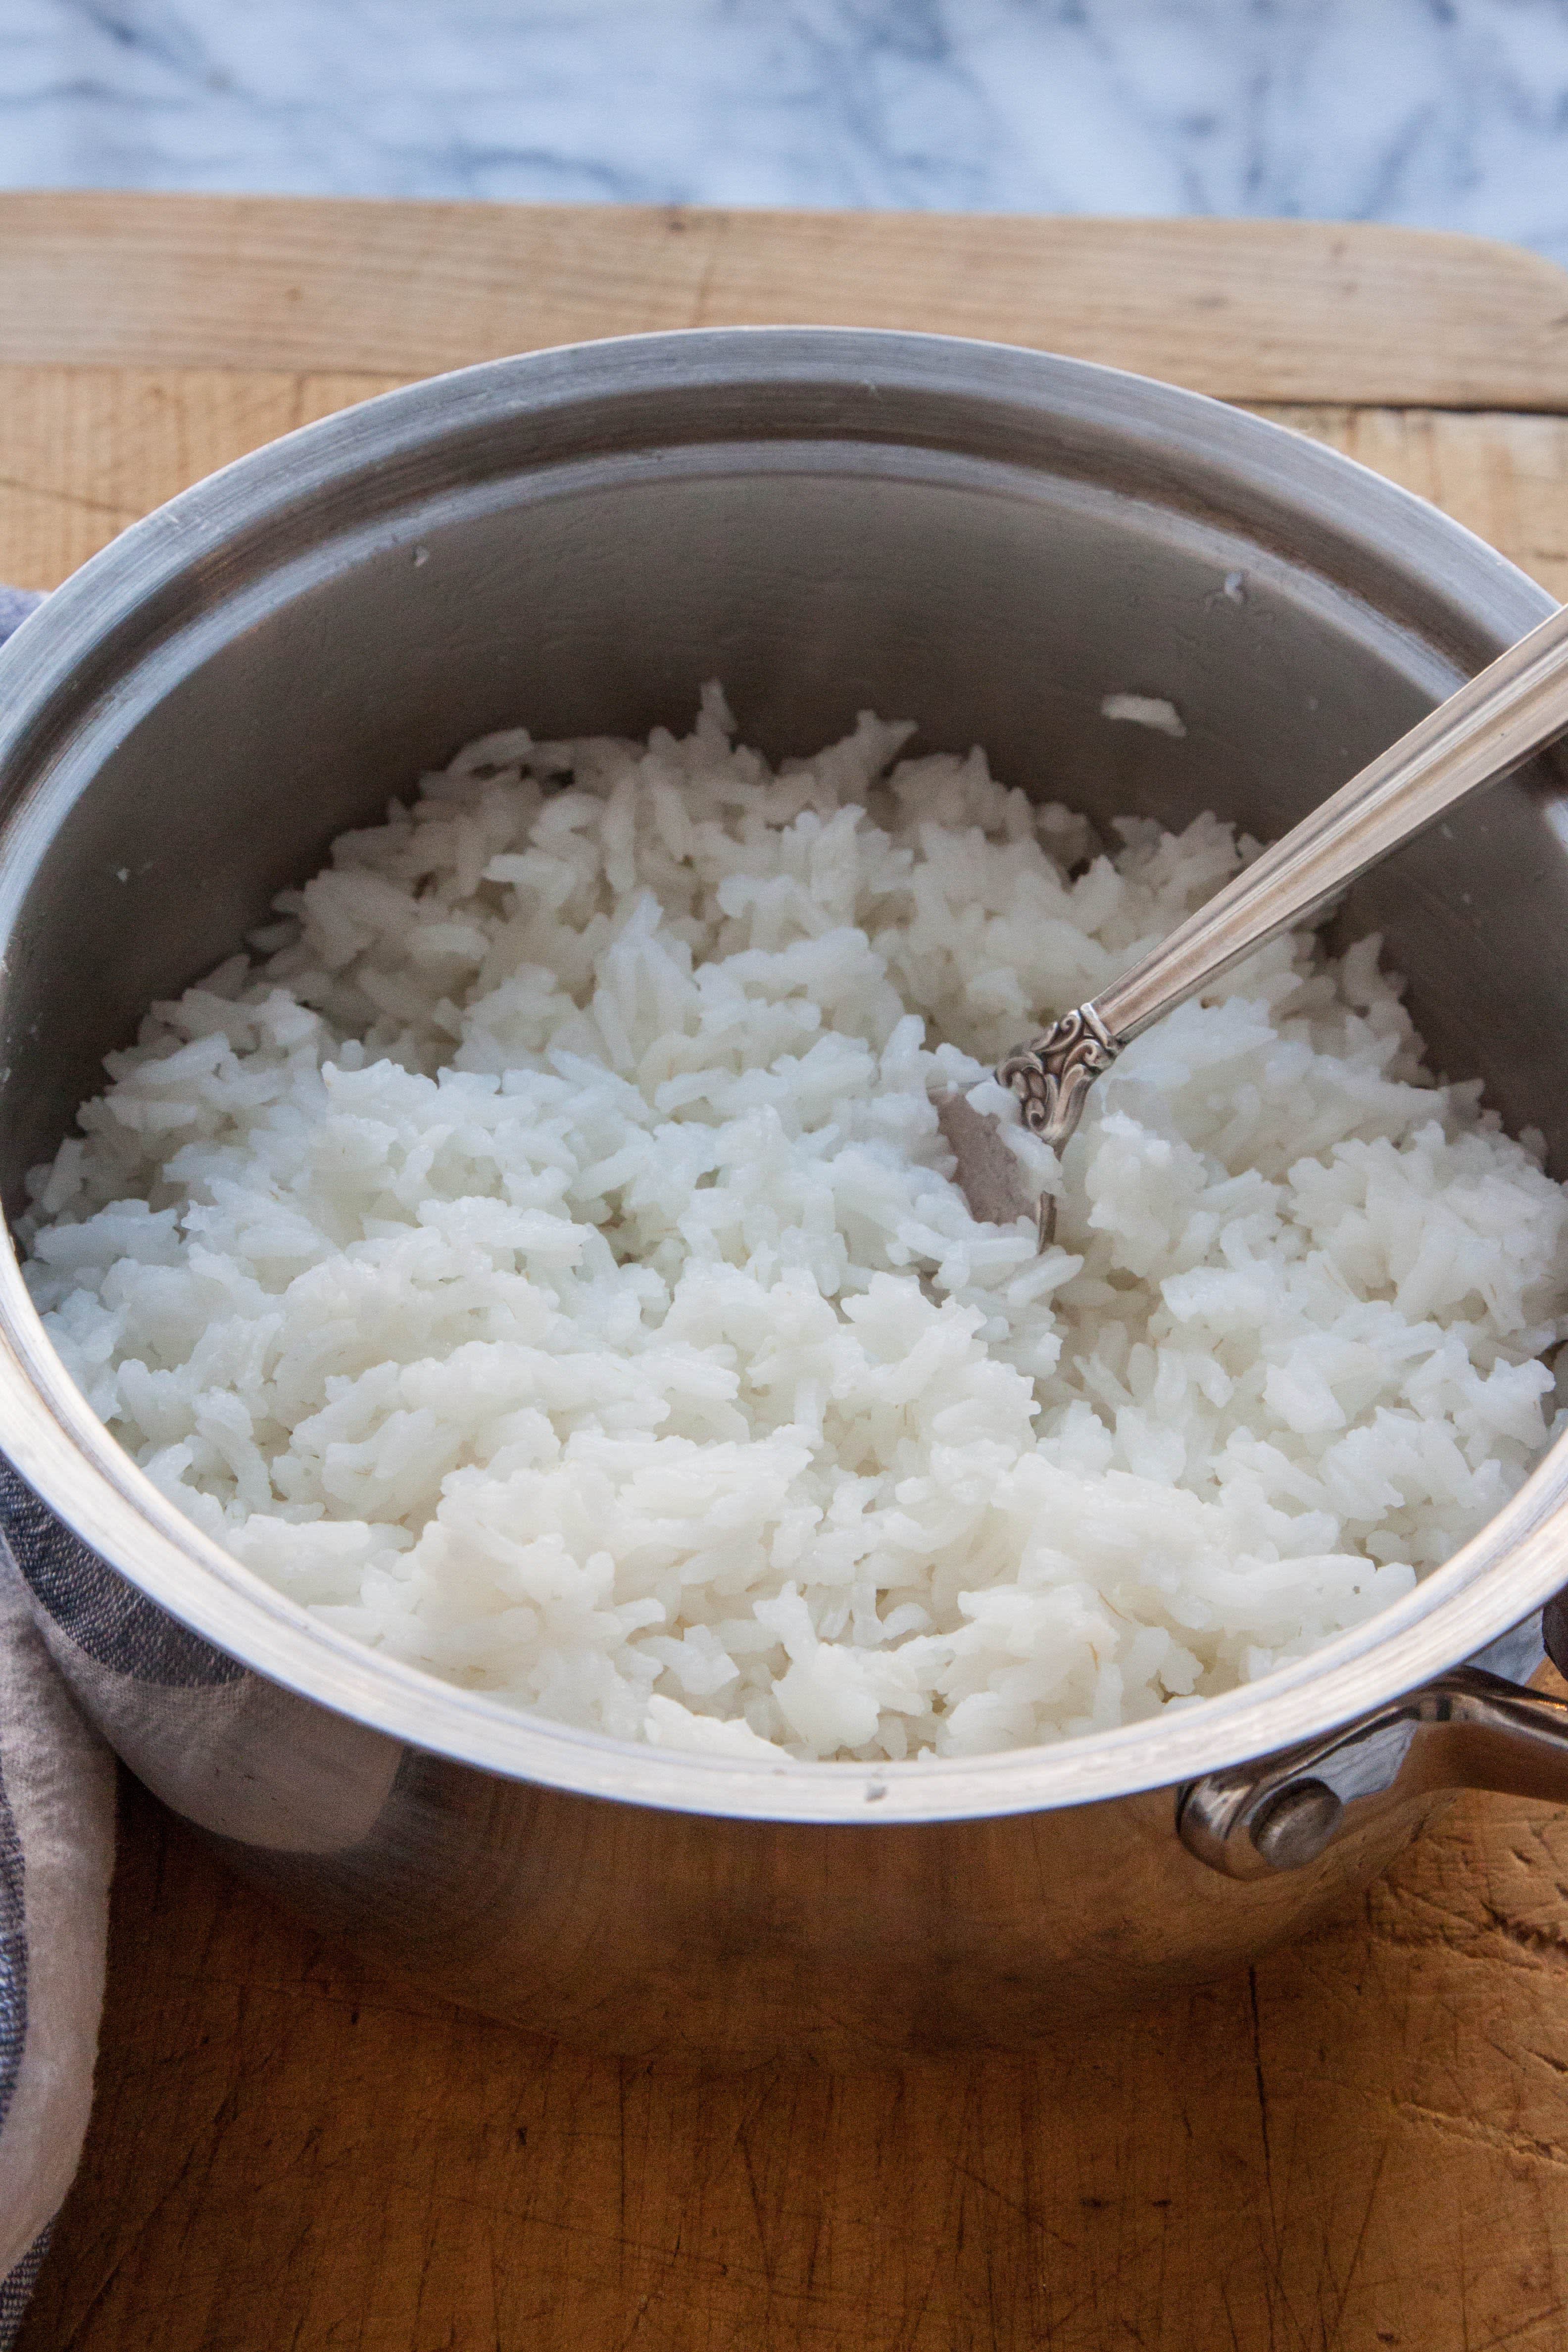 How do you cook basmati rice so it doesn't stick